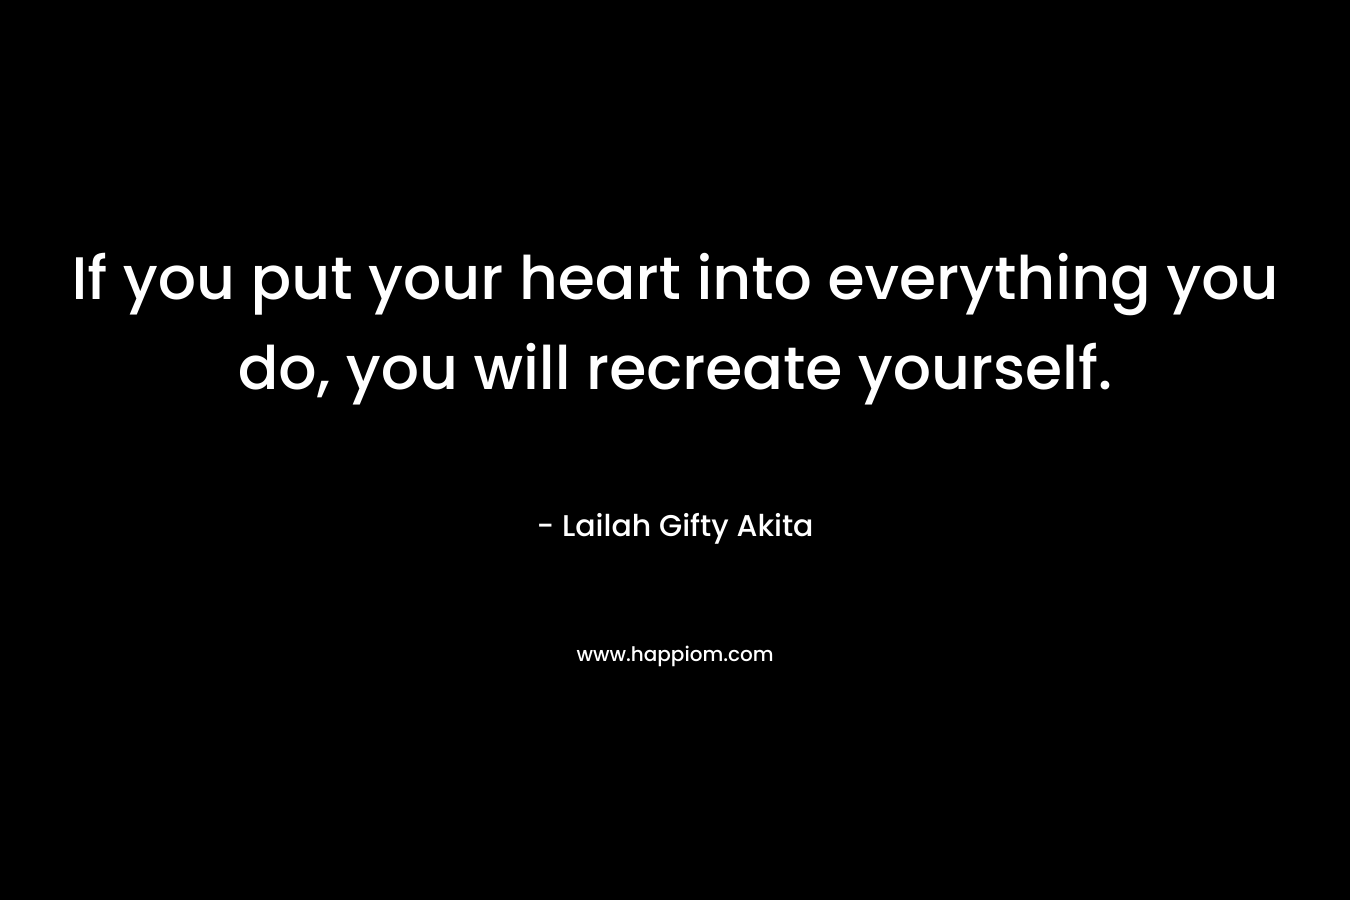 If you put your heart into everything you do, you will recreate yourself.